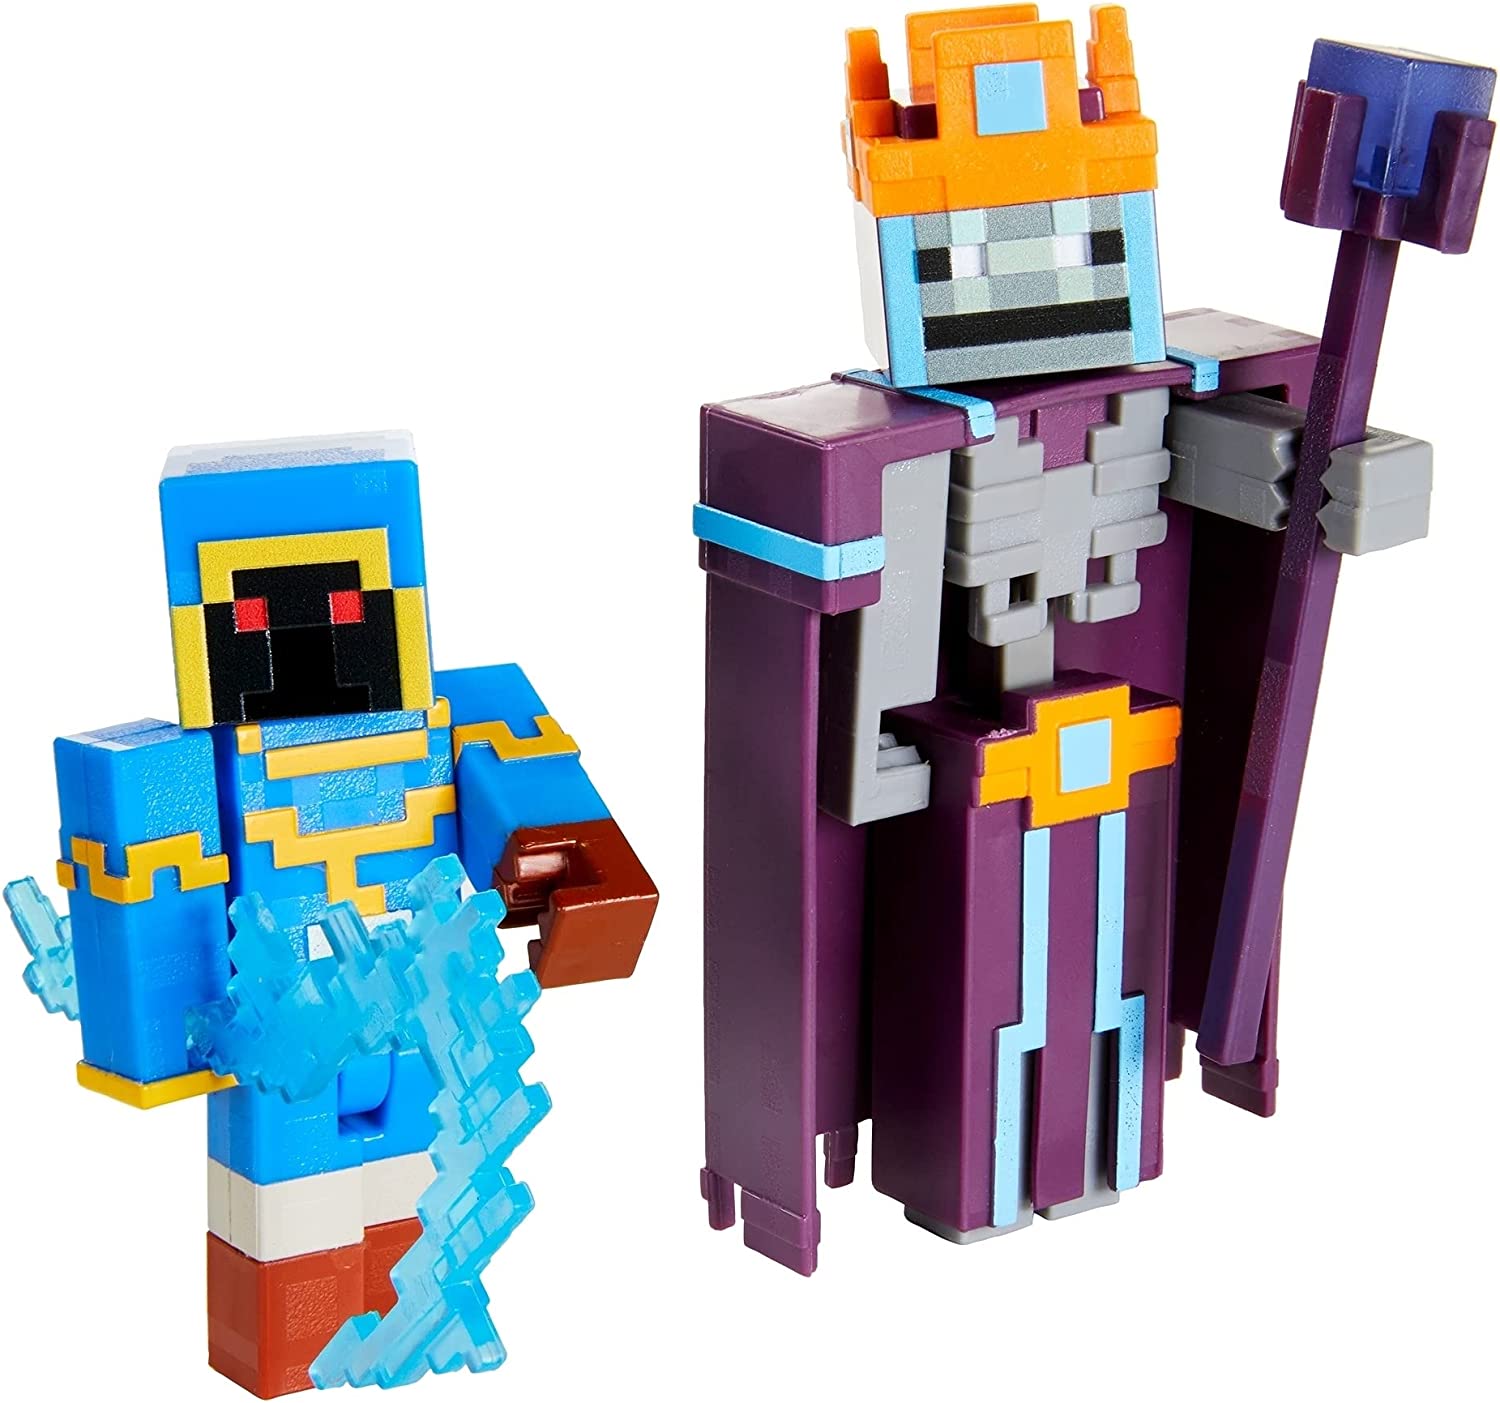 Minecraft Dungeons 3.25" 2-Pk, Arch Illager & Redstone Golem Battle Figures, Great for Playing, Trading, and Collecting